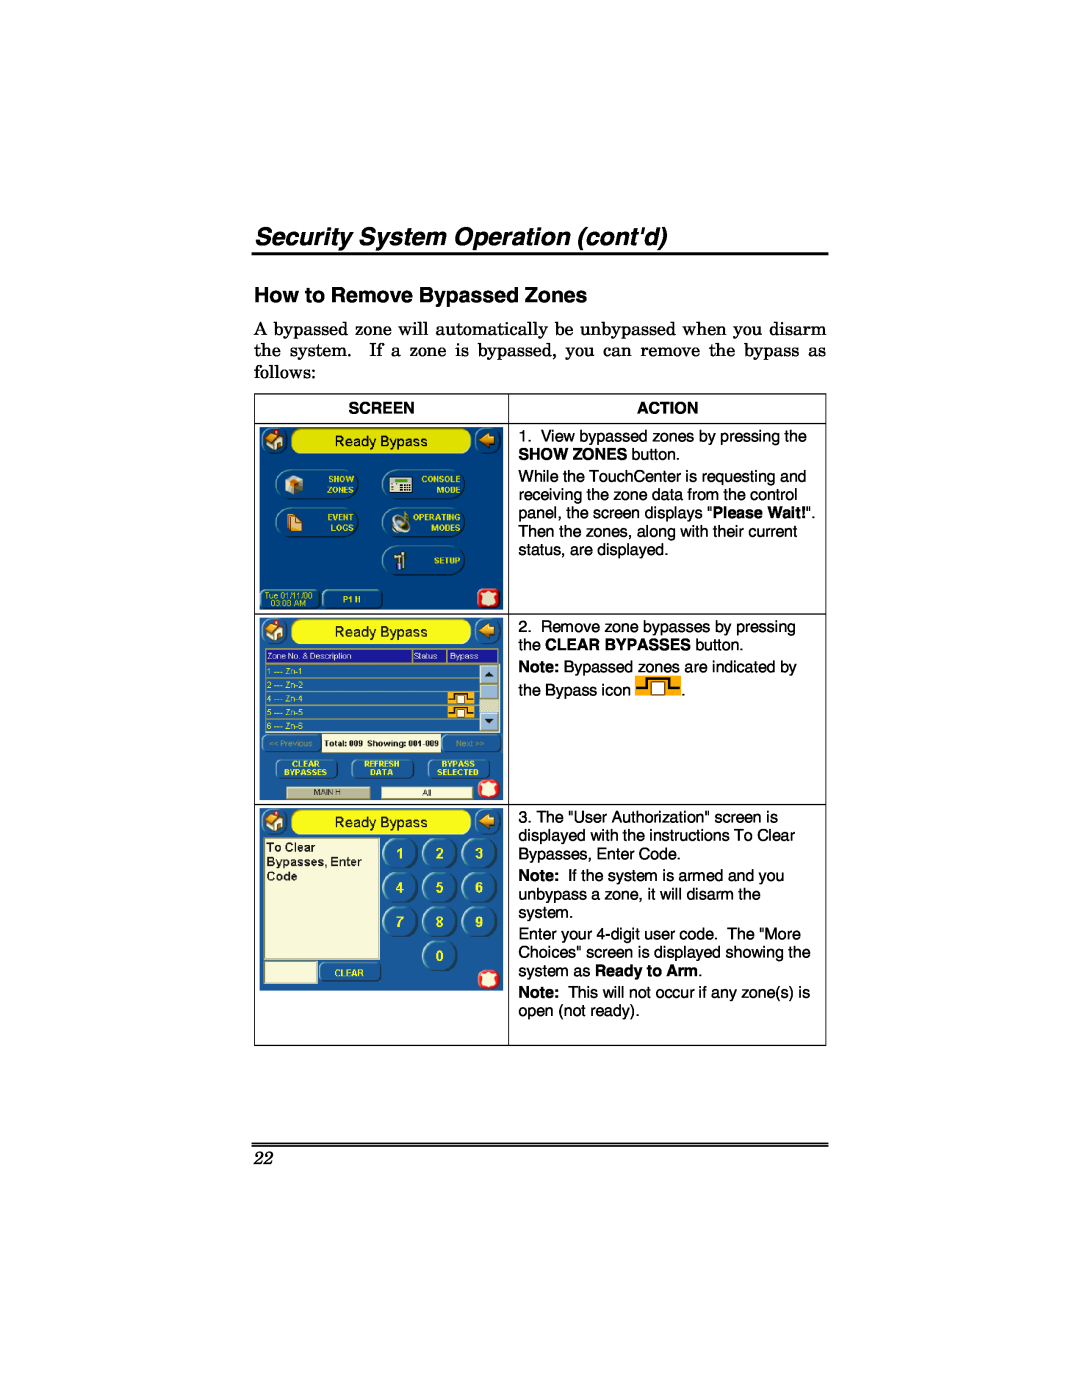 Honeywell 6271 manual How to Remove Bypassed Zones, Security System Operation contd, Screen, Action 